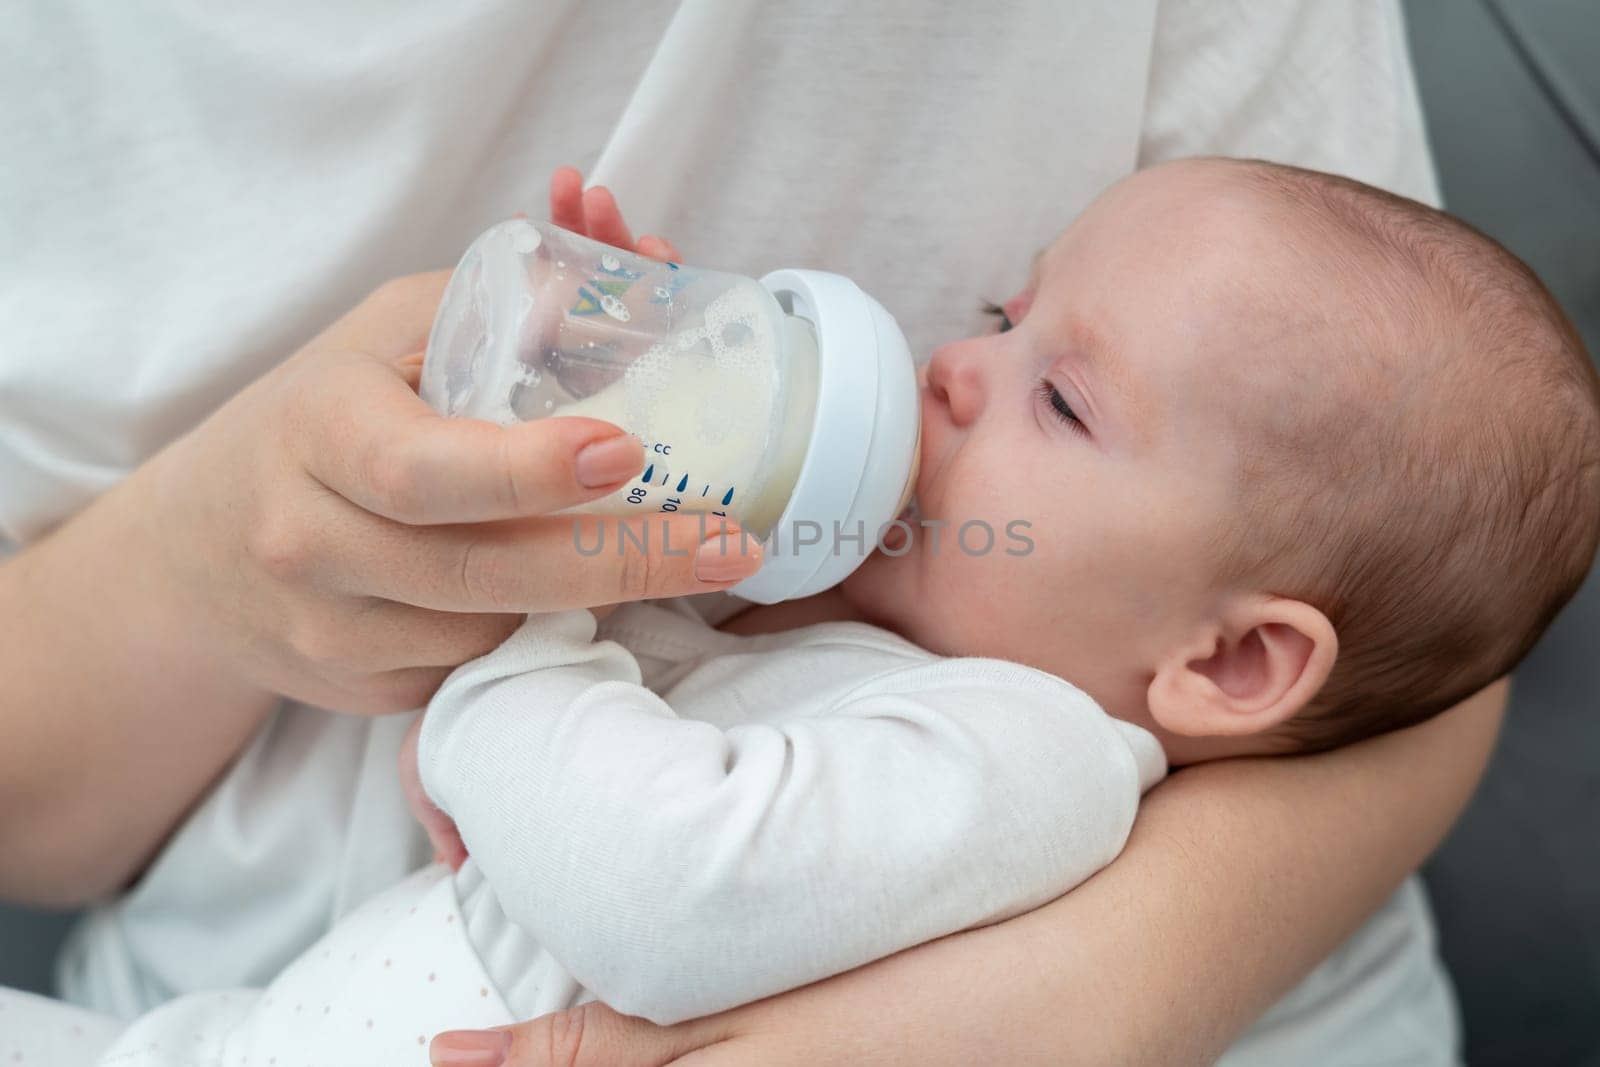 Tender moment of a mother holding and bottle-feeding her baby, capturing the simple joys of